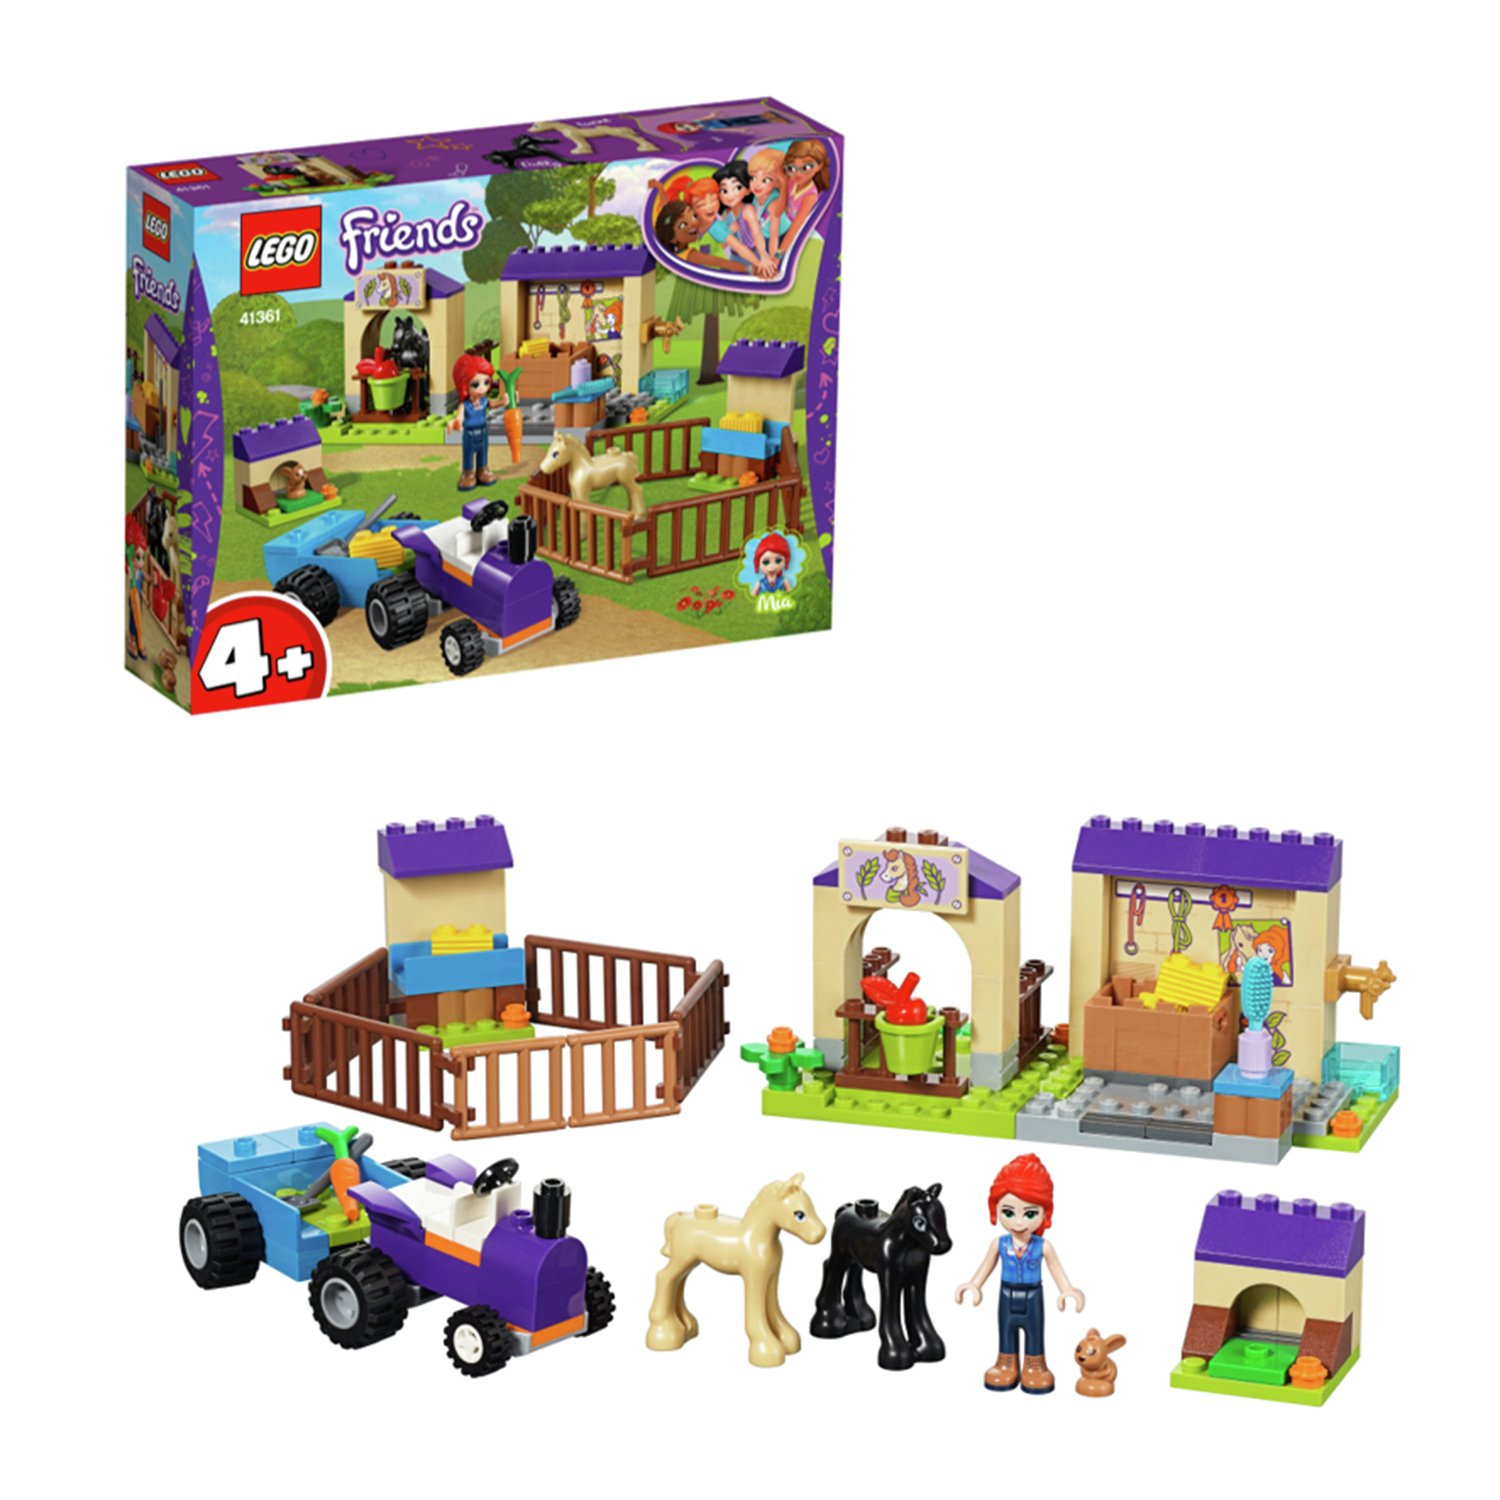 LEGO Friends Mia's Foal Stable Playset - 41361